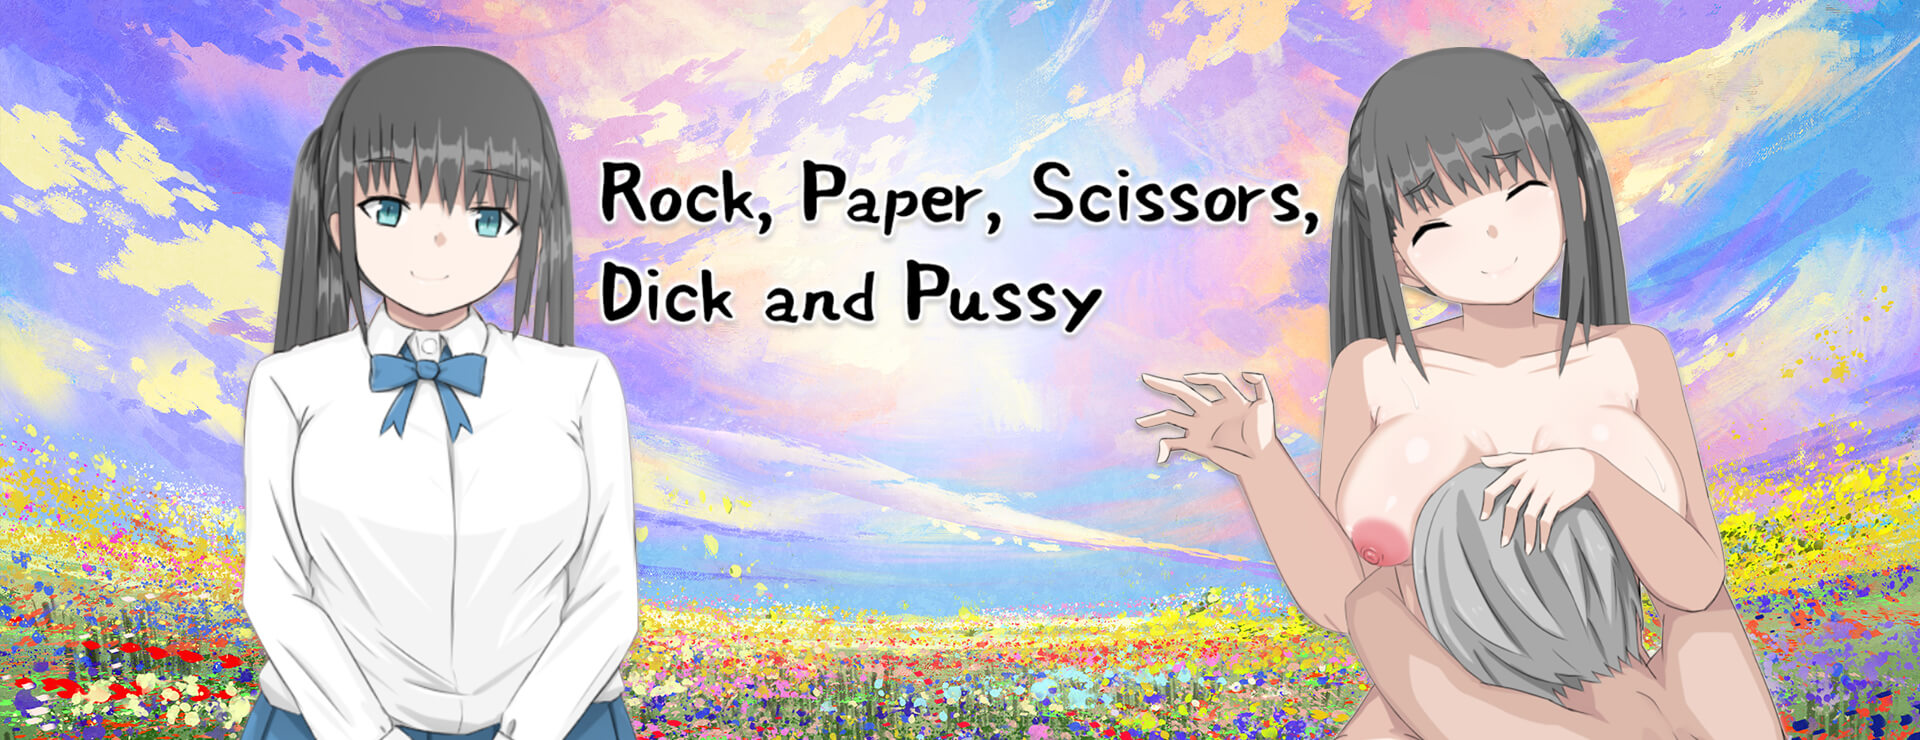 Rock Paper Scissors Dick and Pussy thumbnail